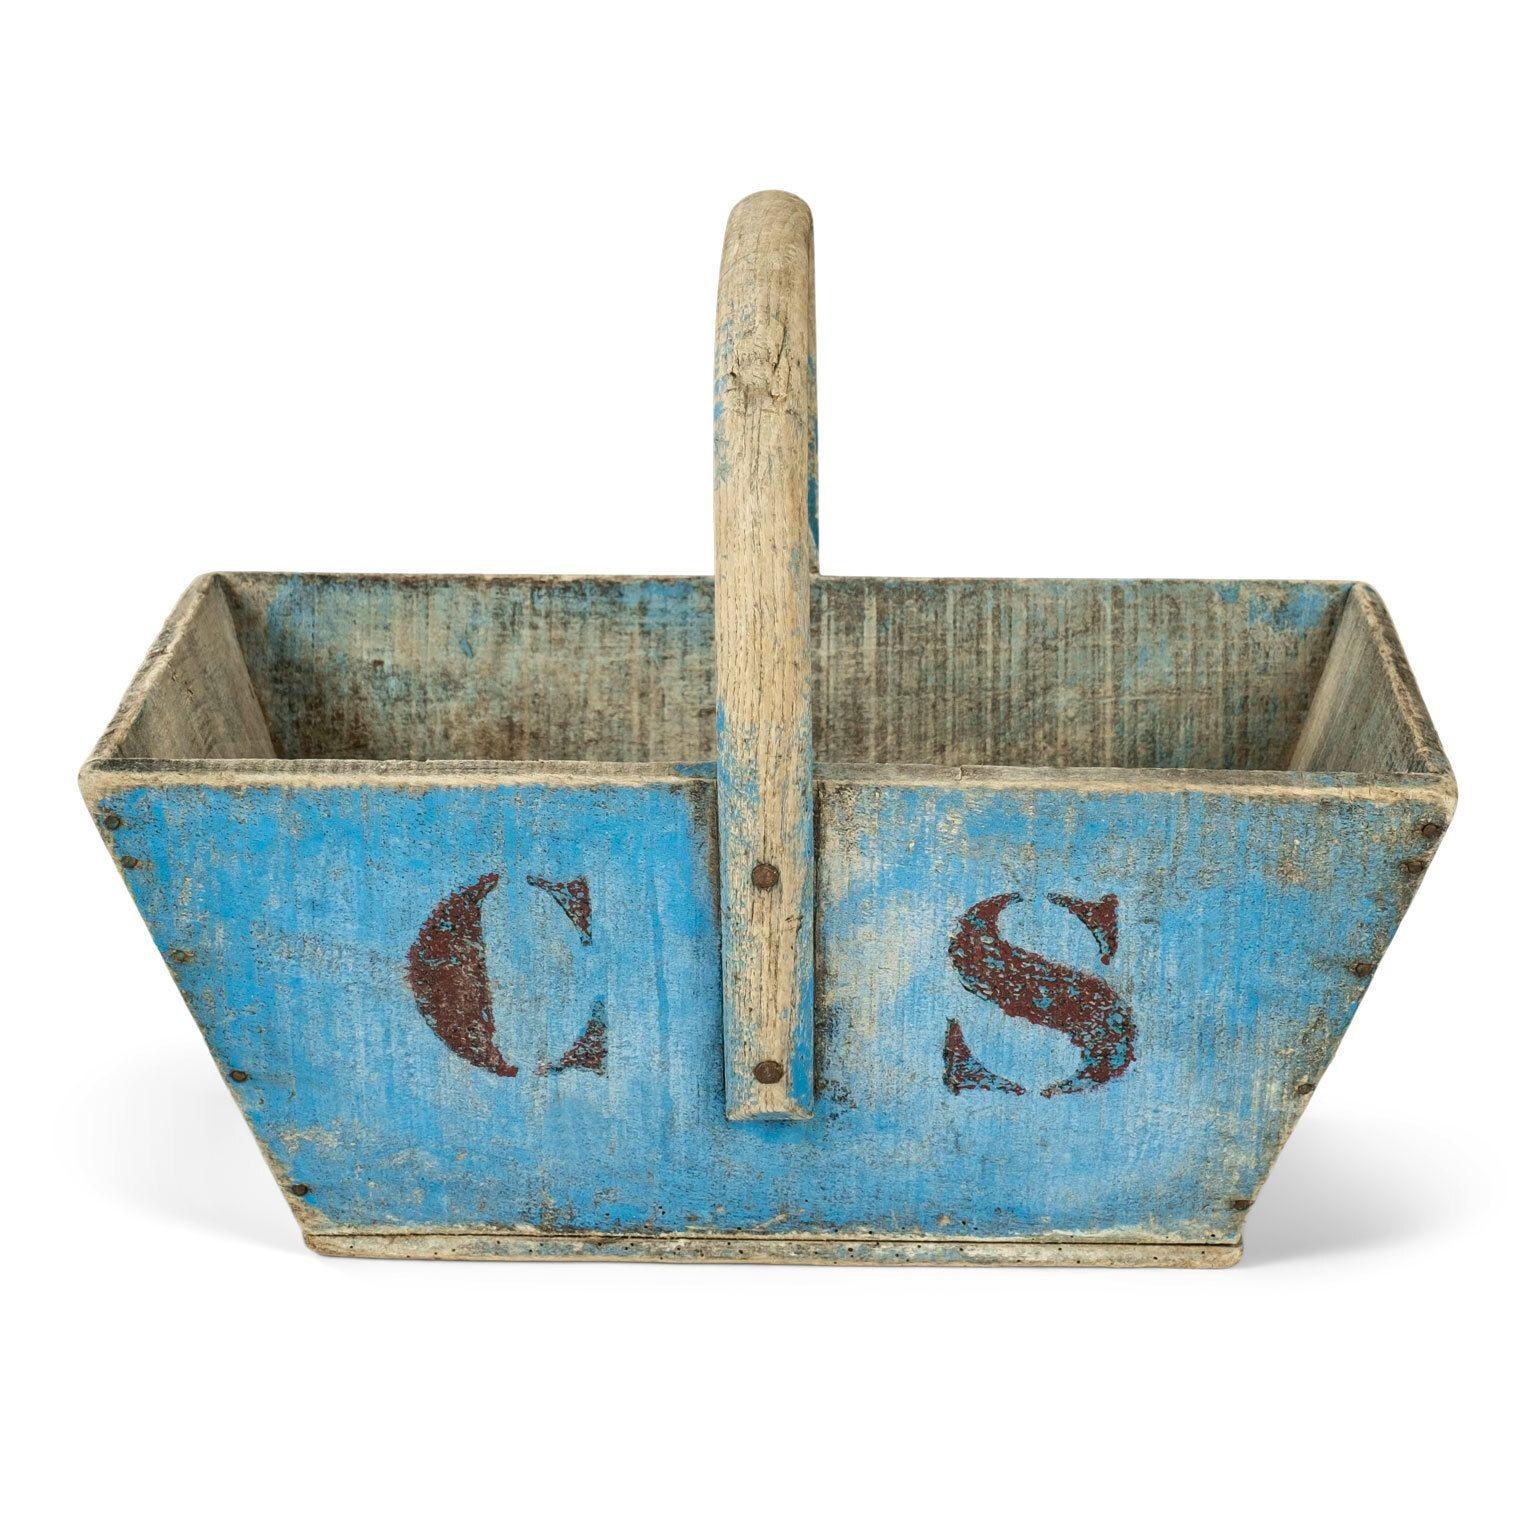 Blue-painted wooden Swedish basket, or caddy, circa 1880-1910. Bentwood handle, rectangular tapered shape and sturdy nail construction. Losses to original - or early - blue painted finish. Initialed 